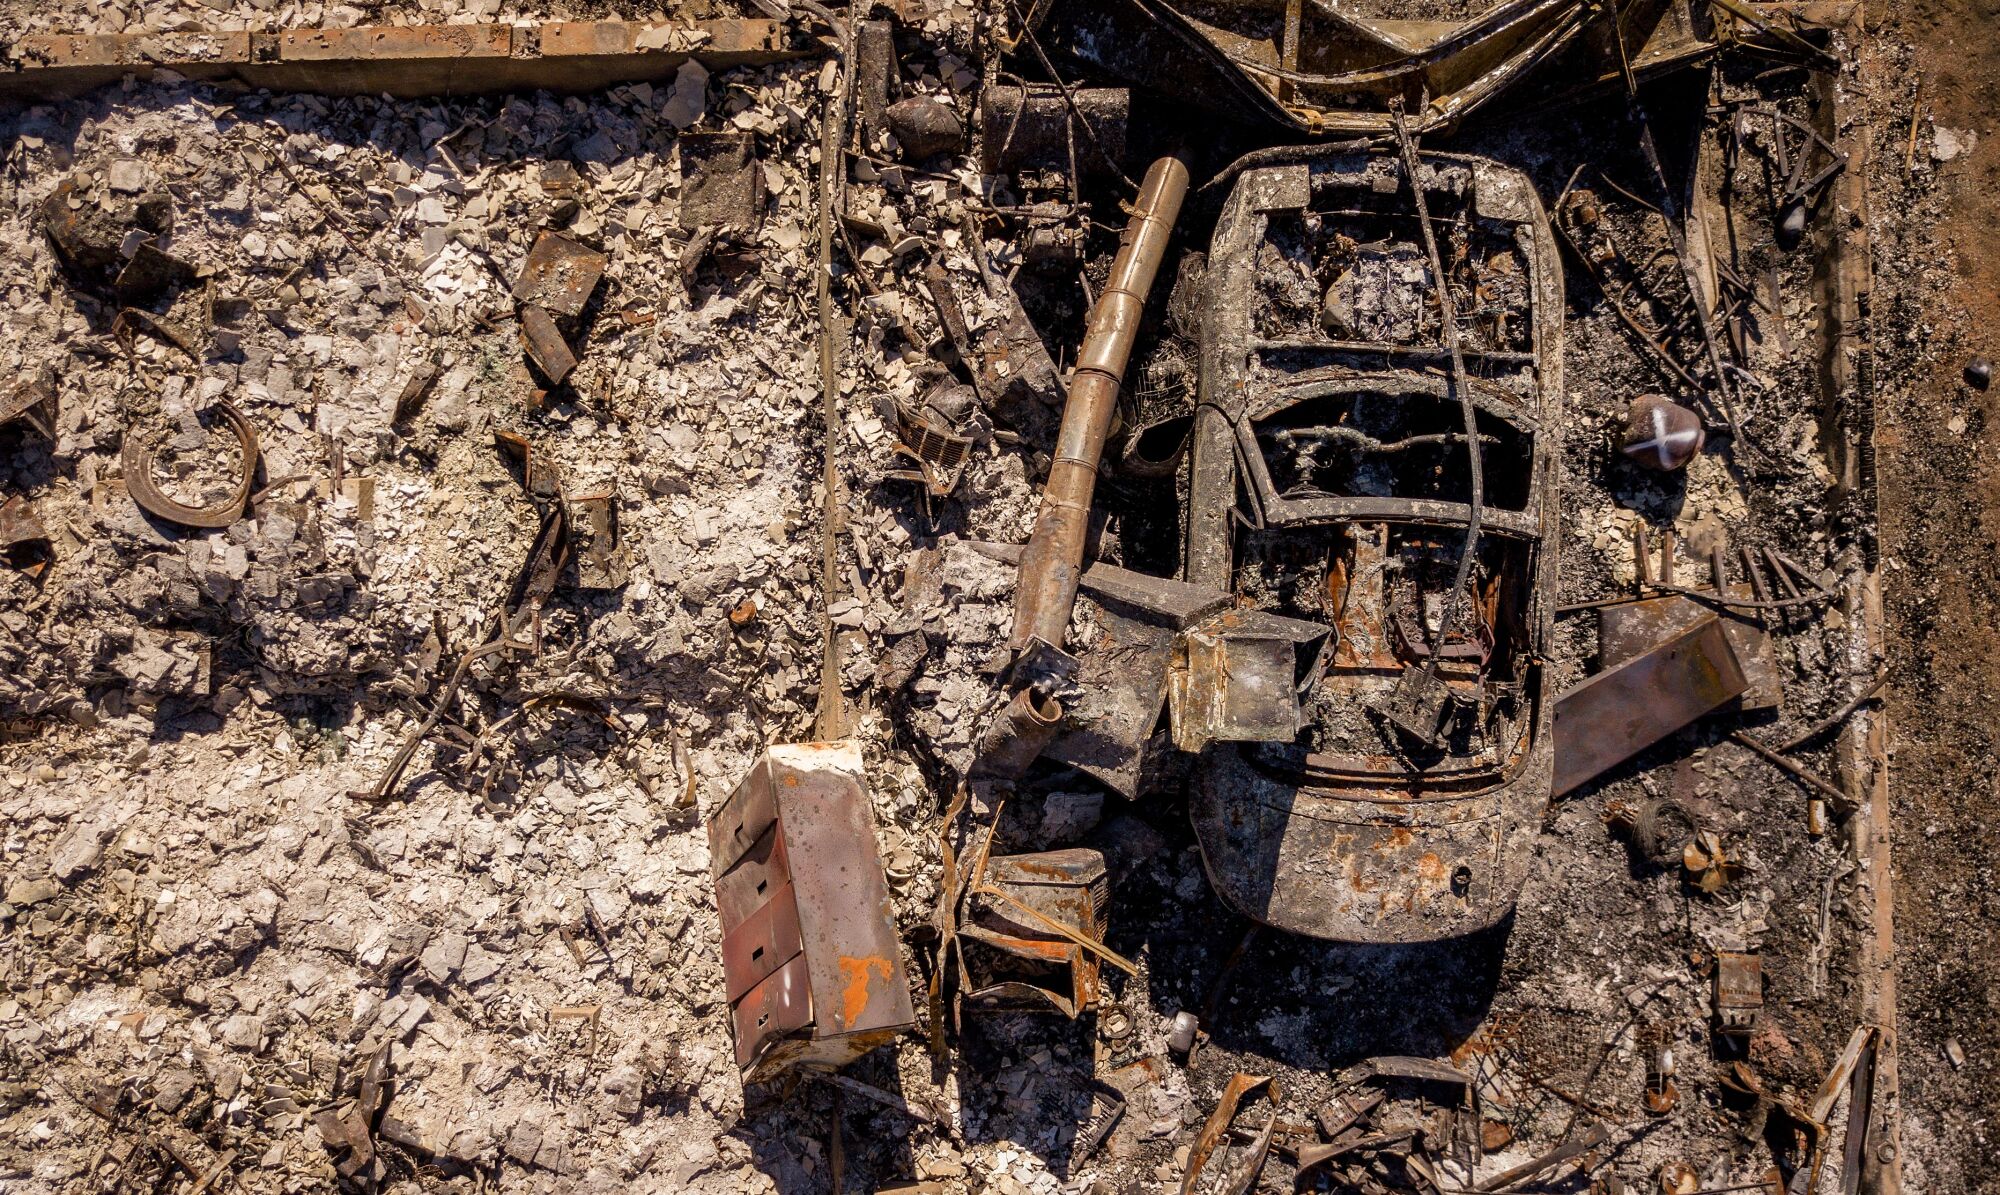 The remains of a burnt vehicle, seen from above.